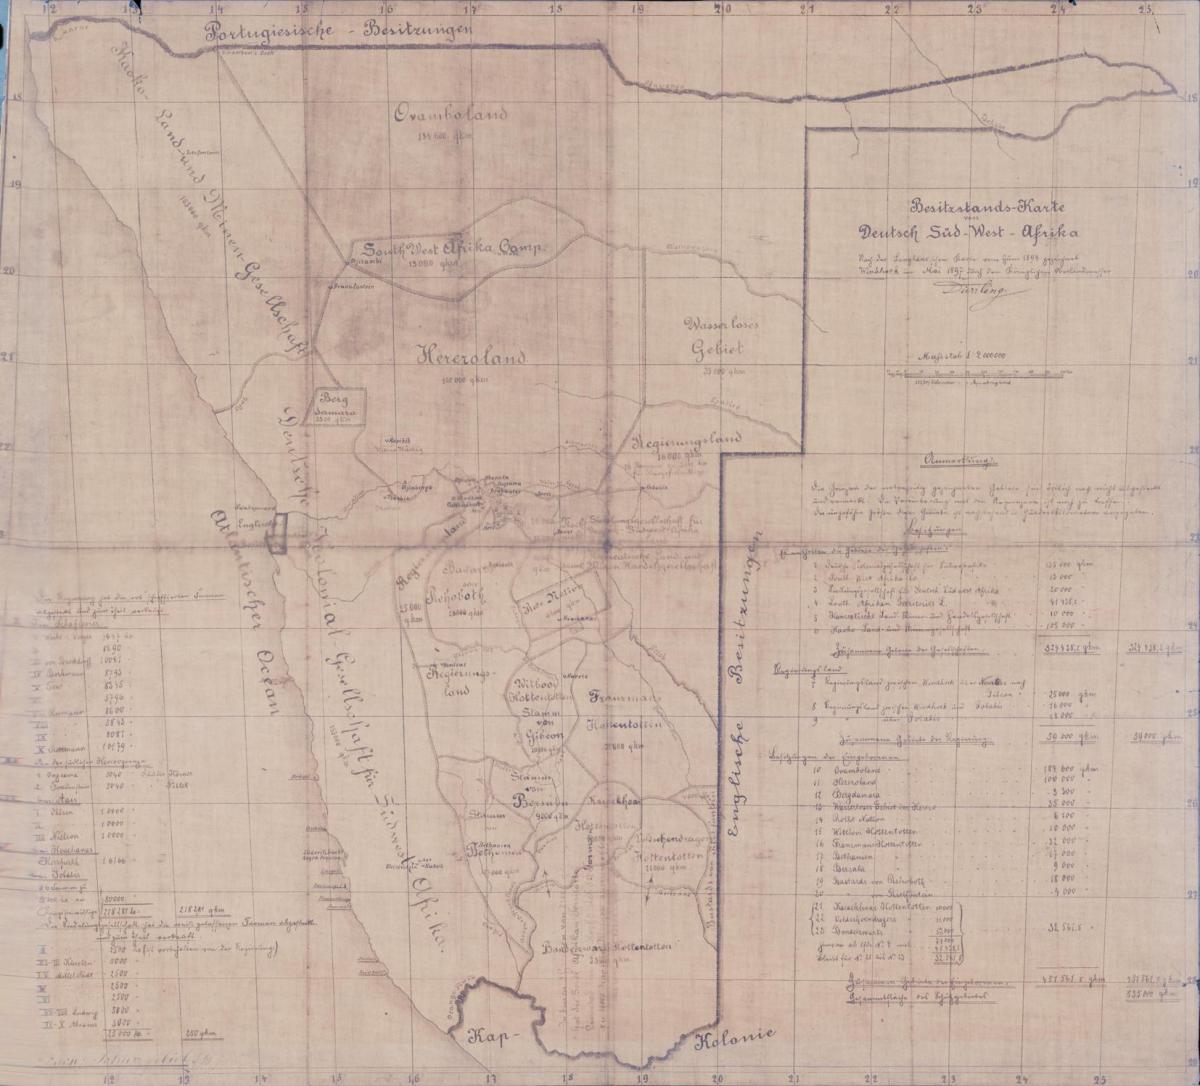 Cadastral map of South West Africa